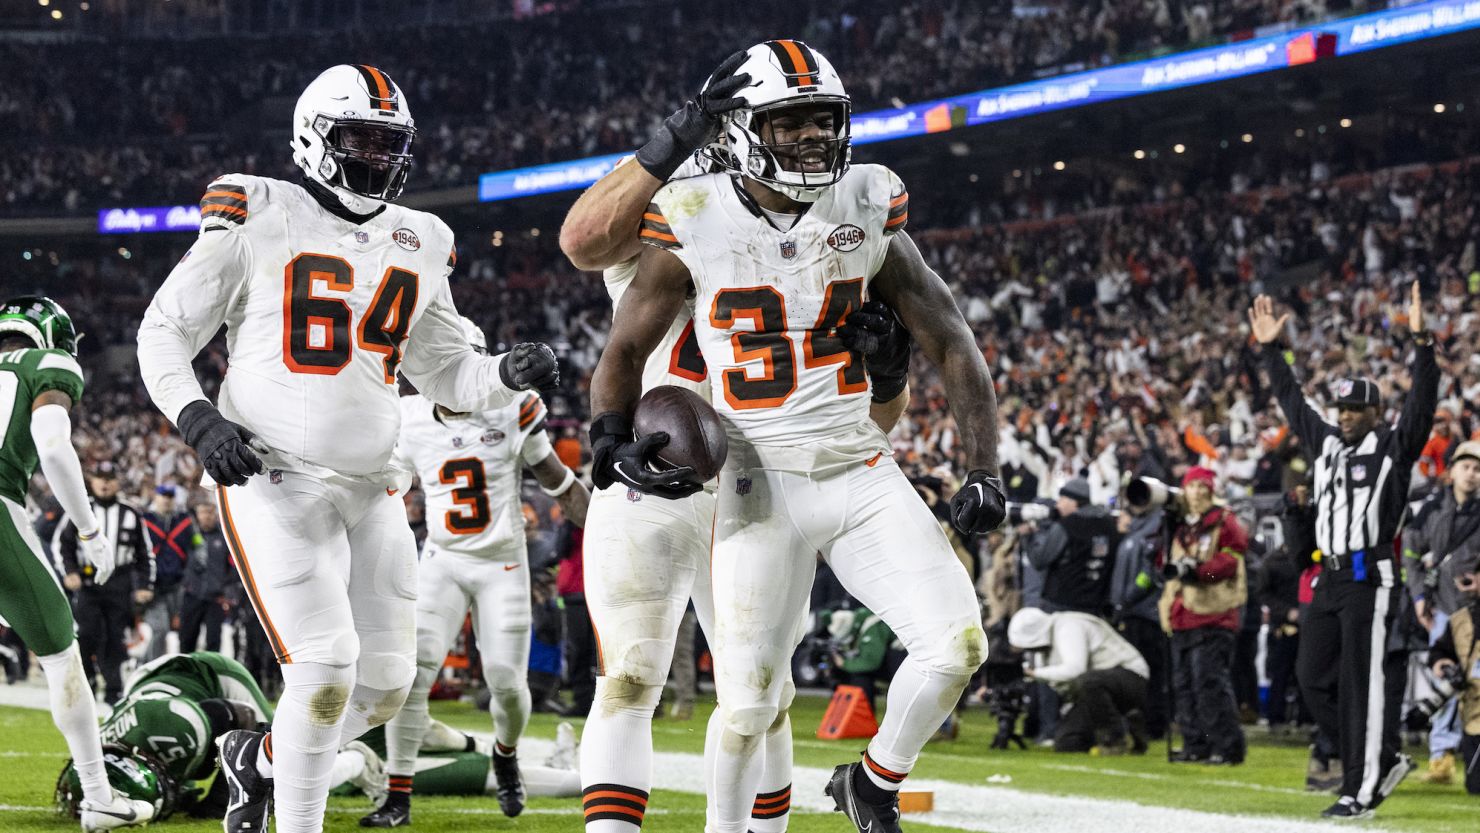 CLEVELAND, OHIO - DECEMBER 28: Jerome Ford #34 of the Cleveland Browns celebrates after scoring a touchdown during the game against the New York Jets at Cleveland Browns Stadium on December 28, 2023 in Cleveland, Ohio. The Browns beat the Jets 37-20. (Photo by Lauren Leigh Bacho/Getty Images)